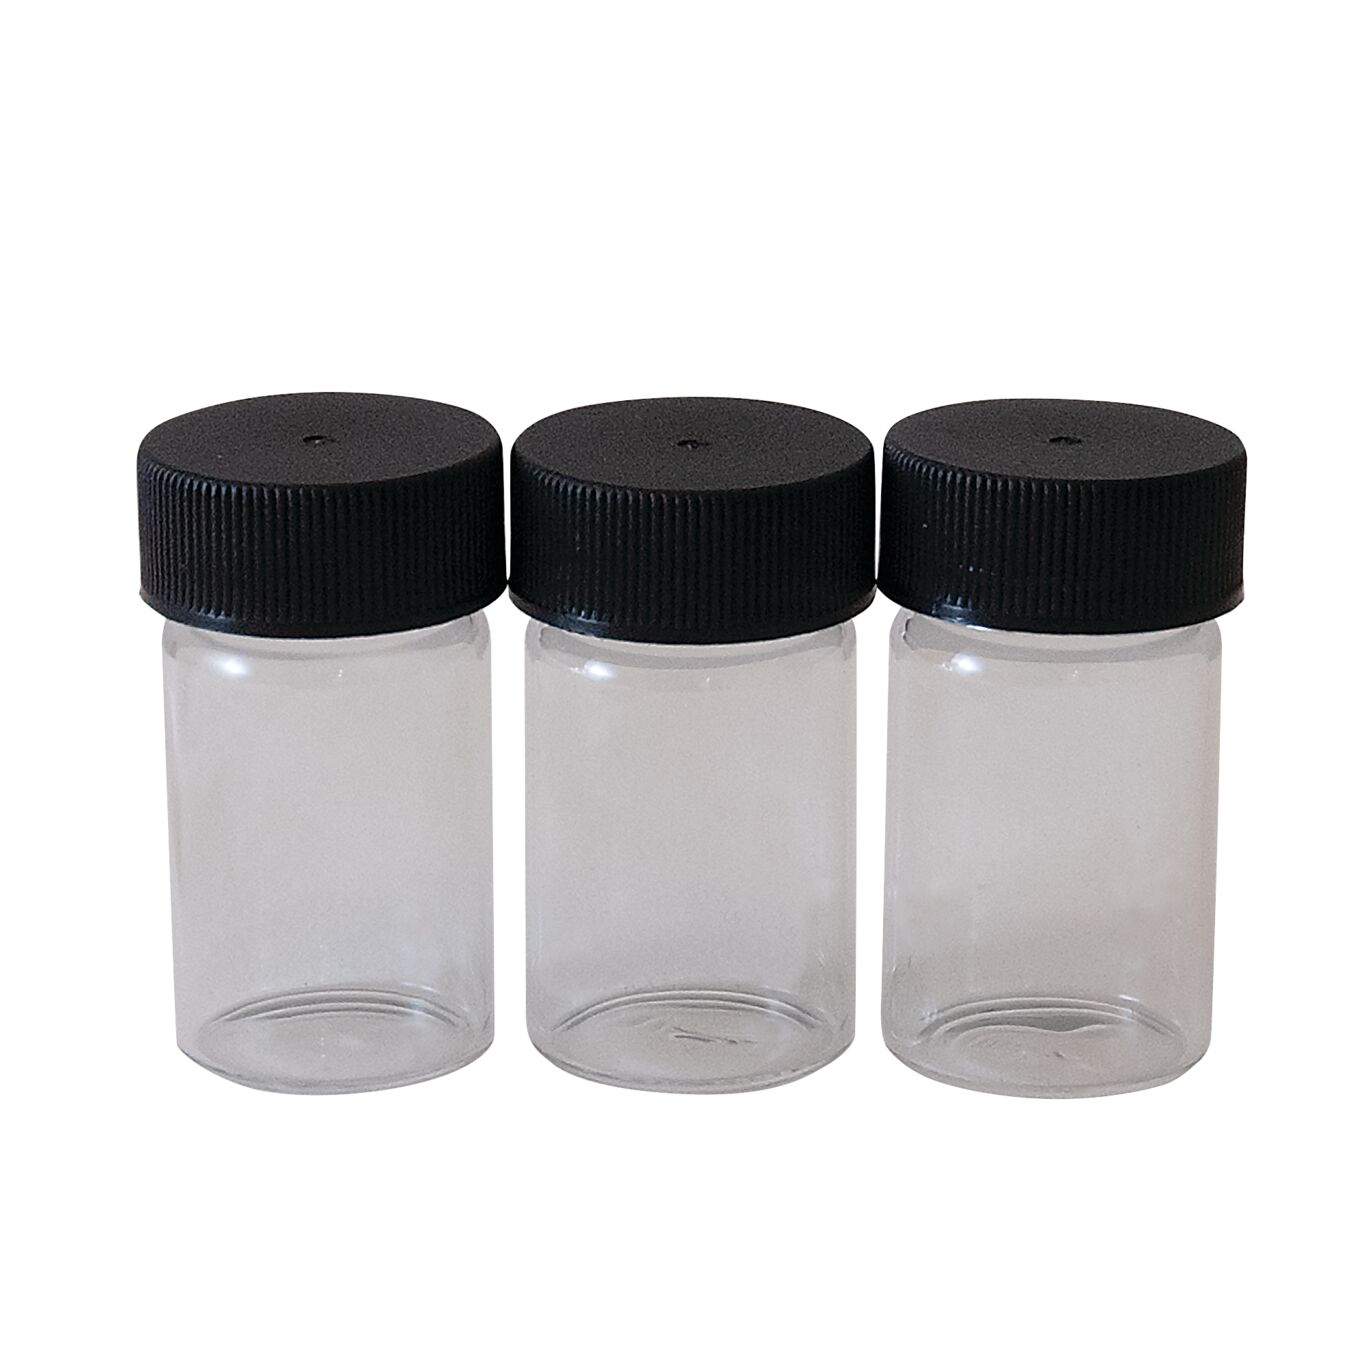 Product Image - Cuvette with Light Shield Cap, 3 Pack, for MicroTPI and MicroTPW